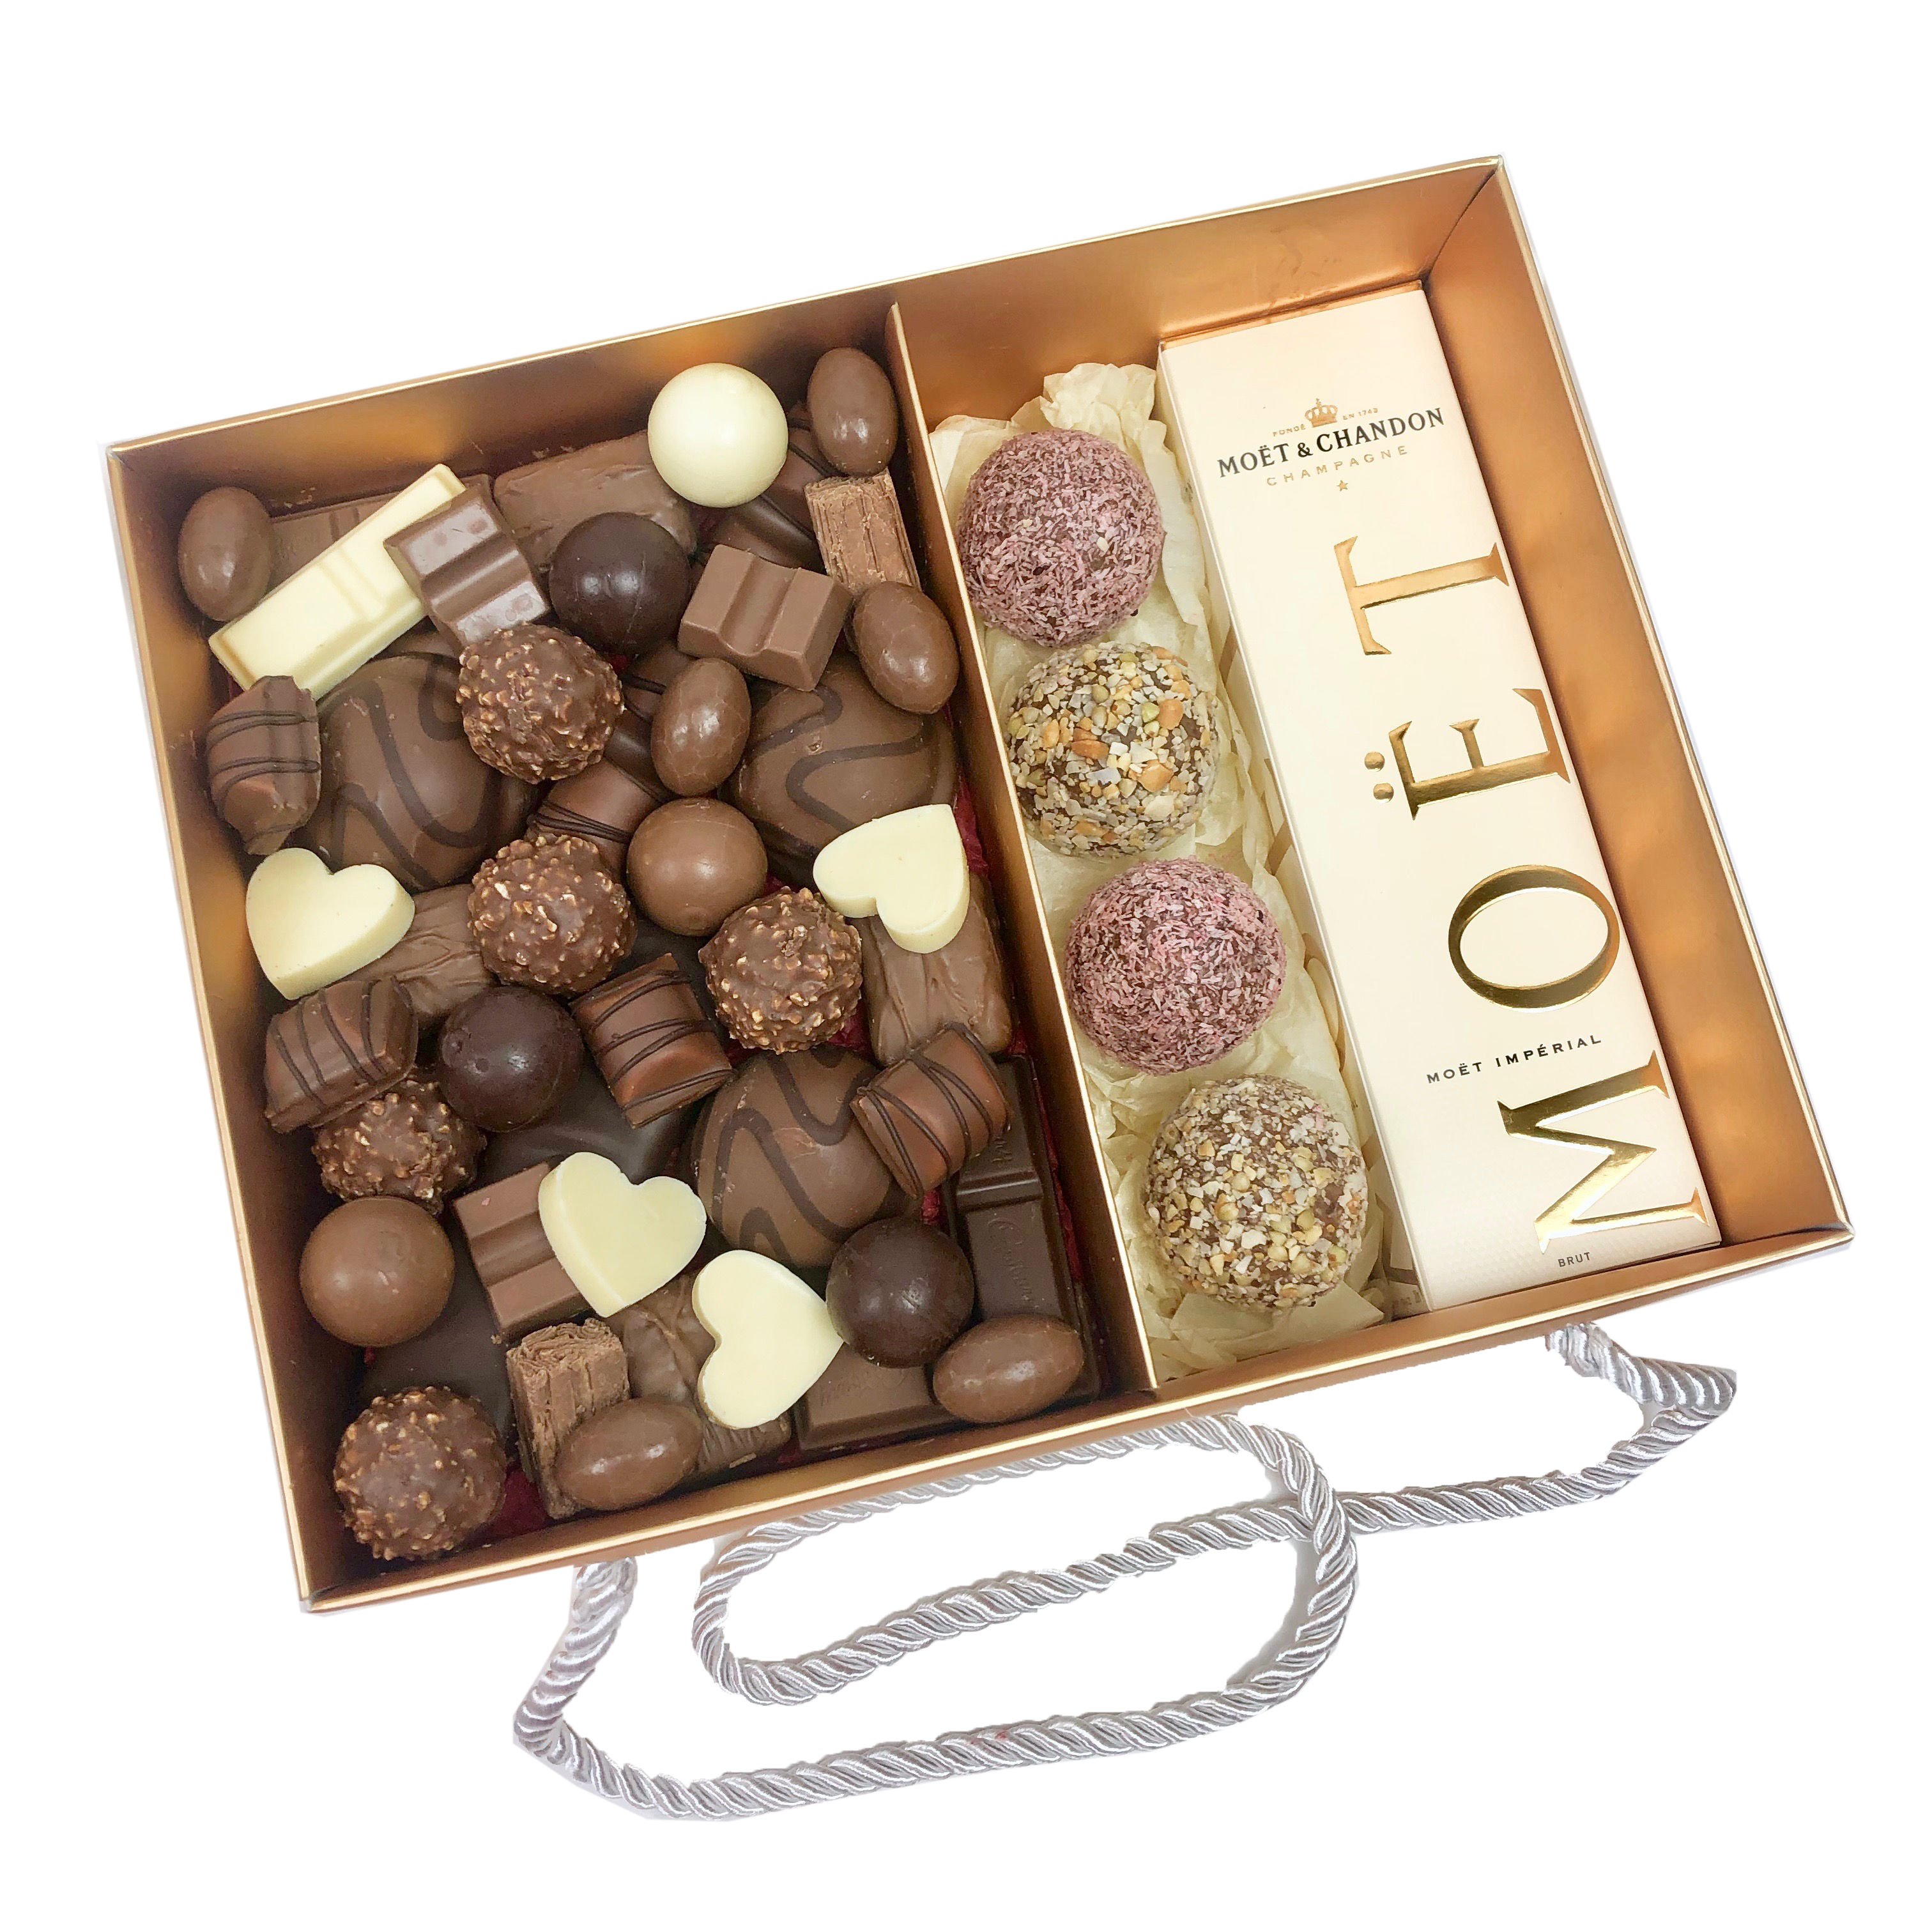 Protein Balls, Chocolate Assortment & Champagne Gift Hamper, hampers online for same day delivery Adelaide